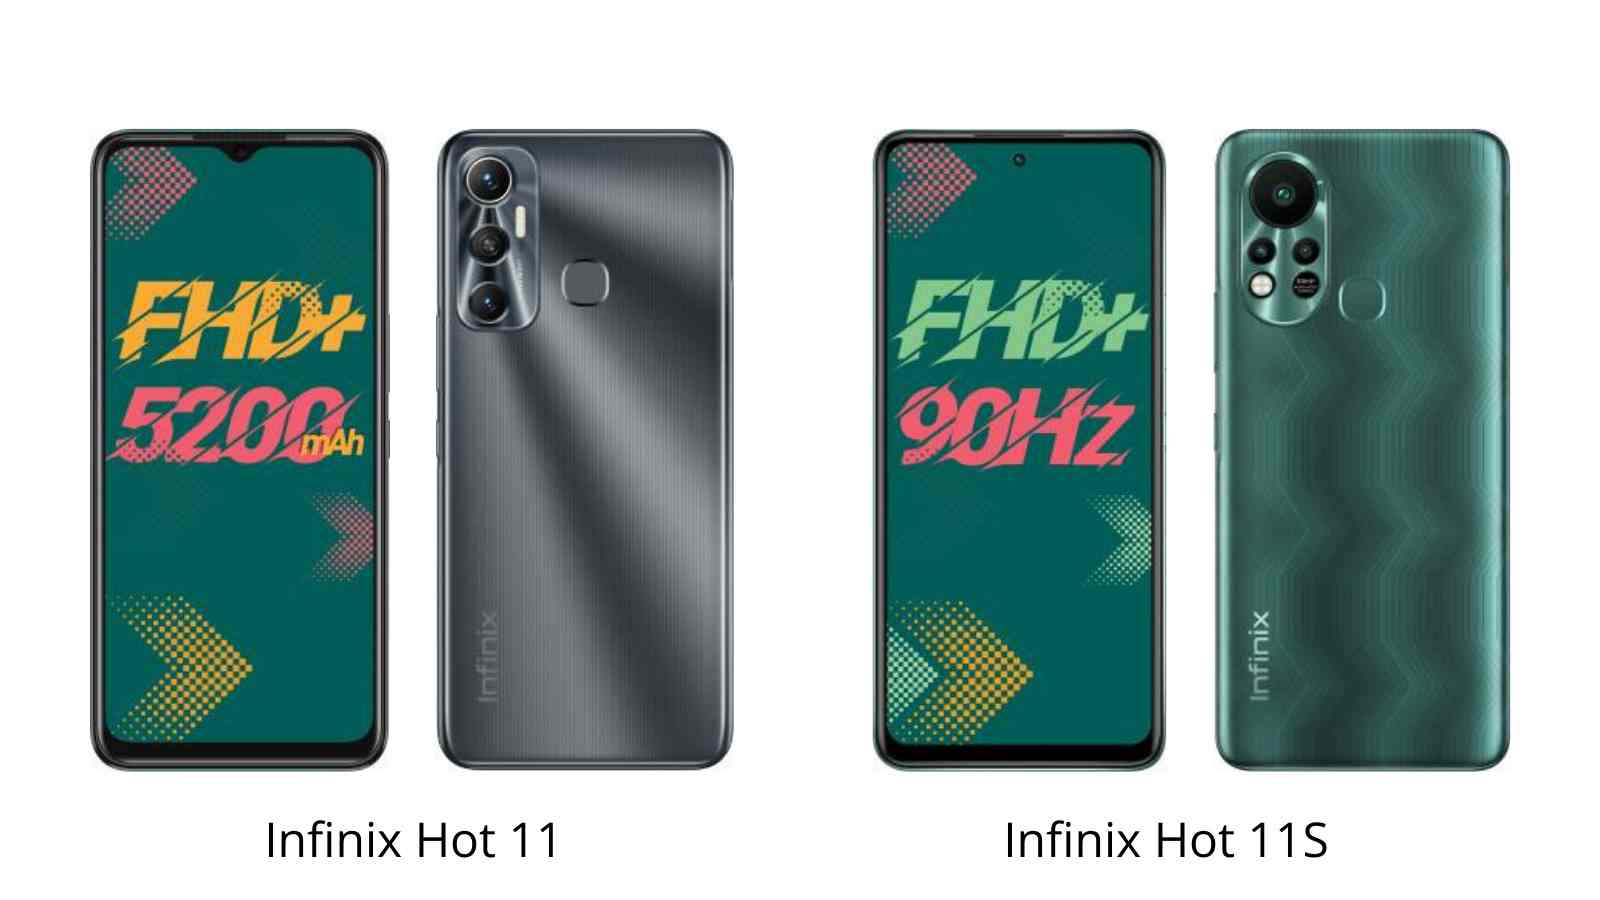 Infinix Hot 11 and Hot 11s with MediaTek octa-core chipsets launched in India: Price, Specifications